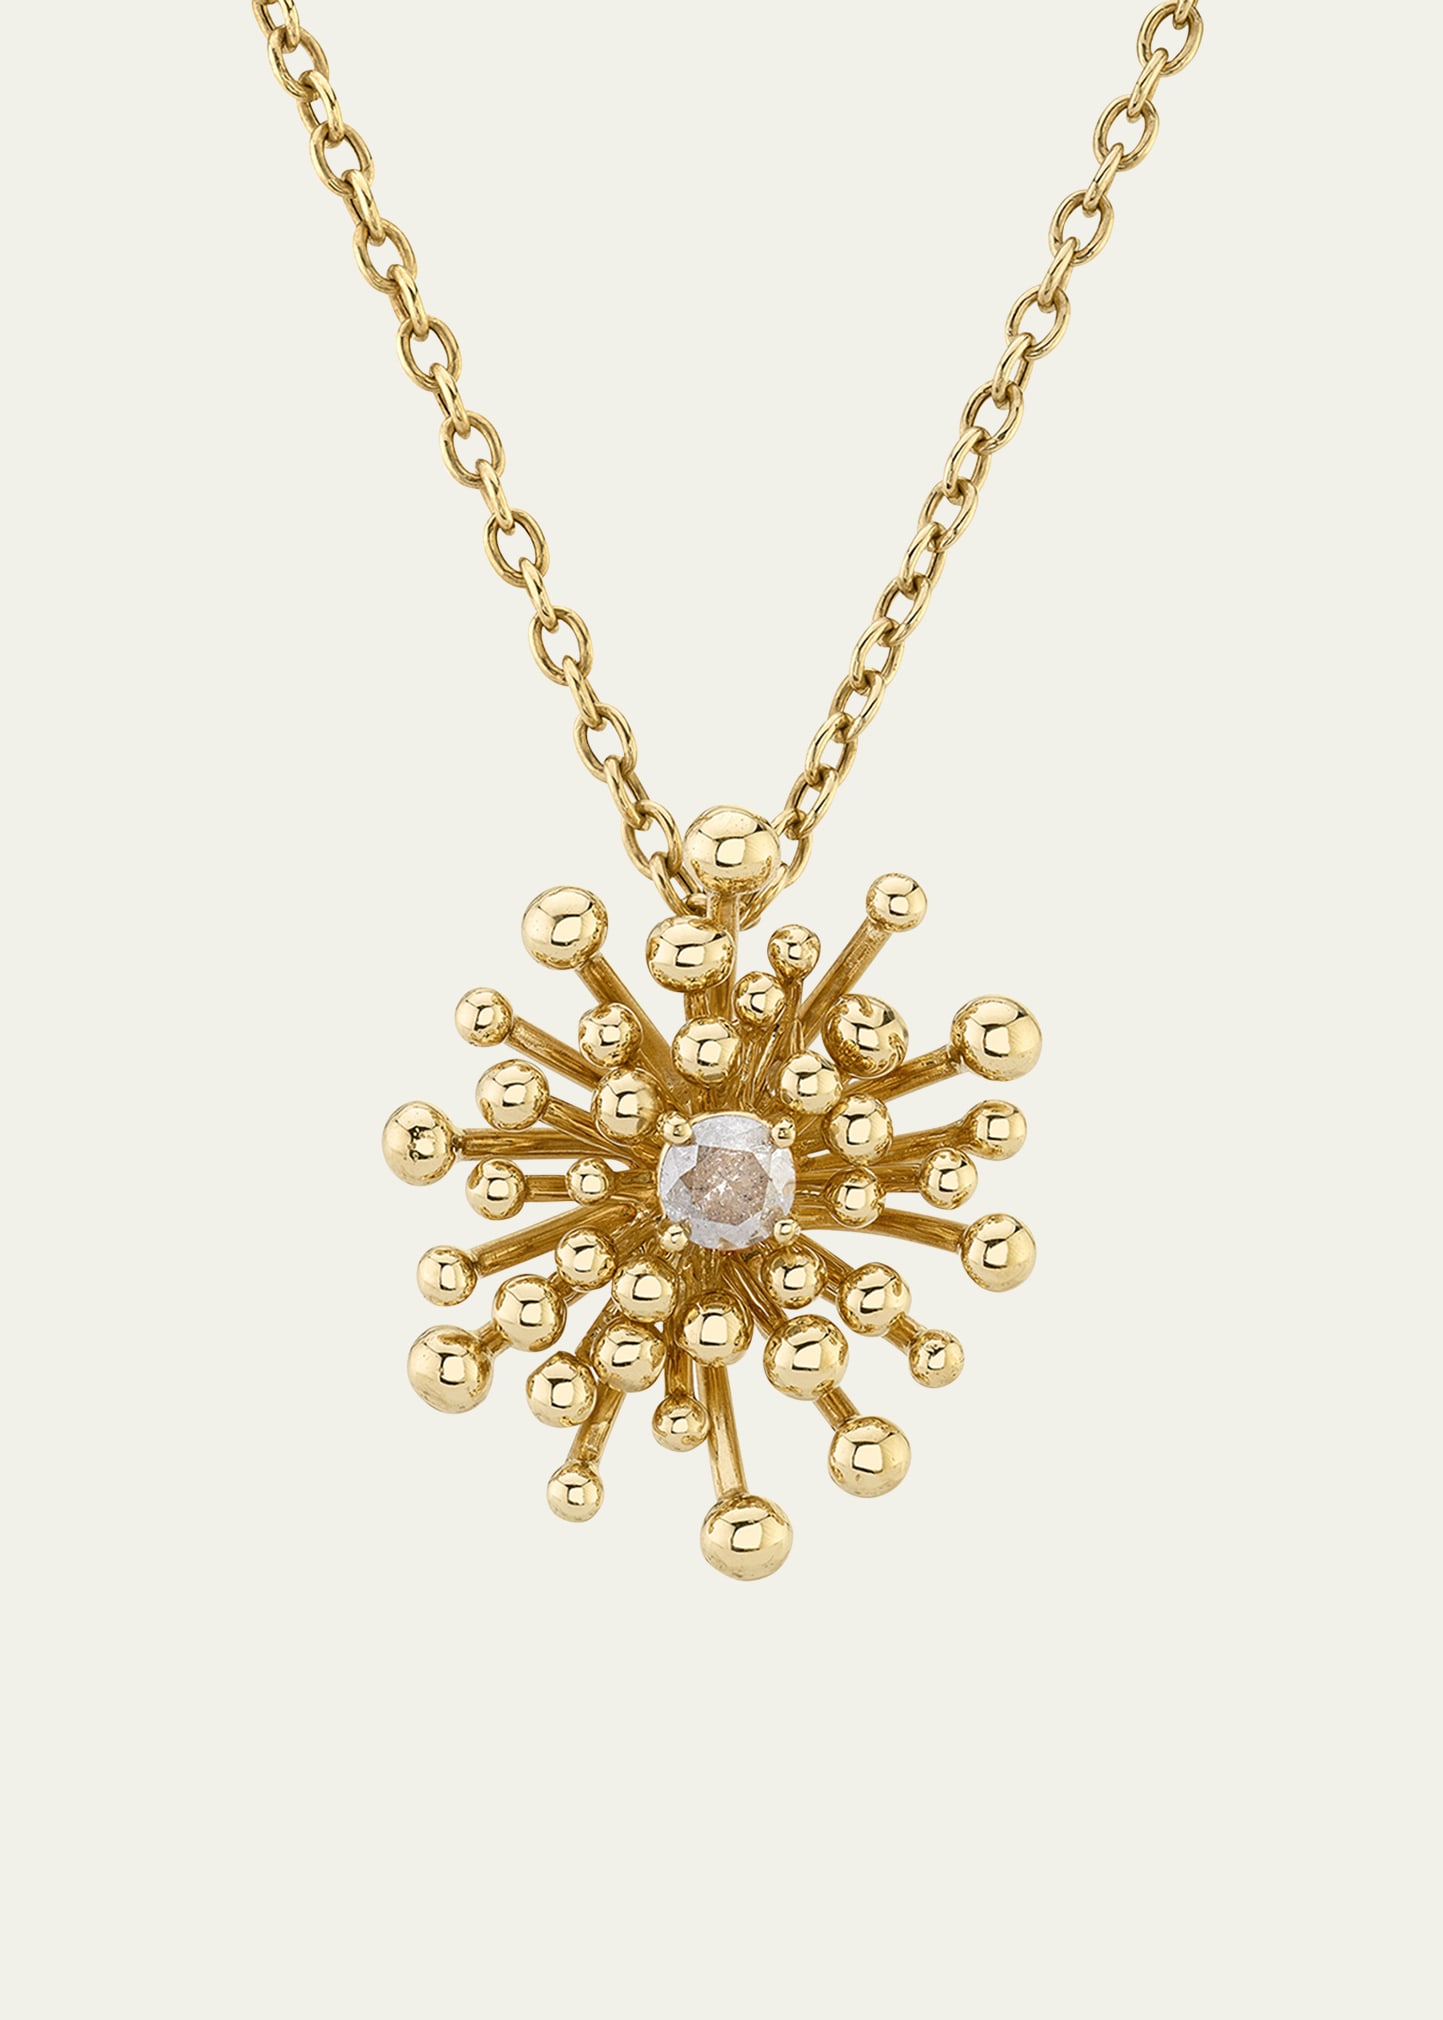 Vram Yellow Gold Nocturne Pendant Necklace With Gray Diamonds